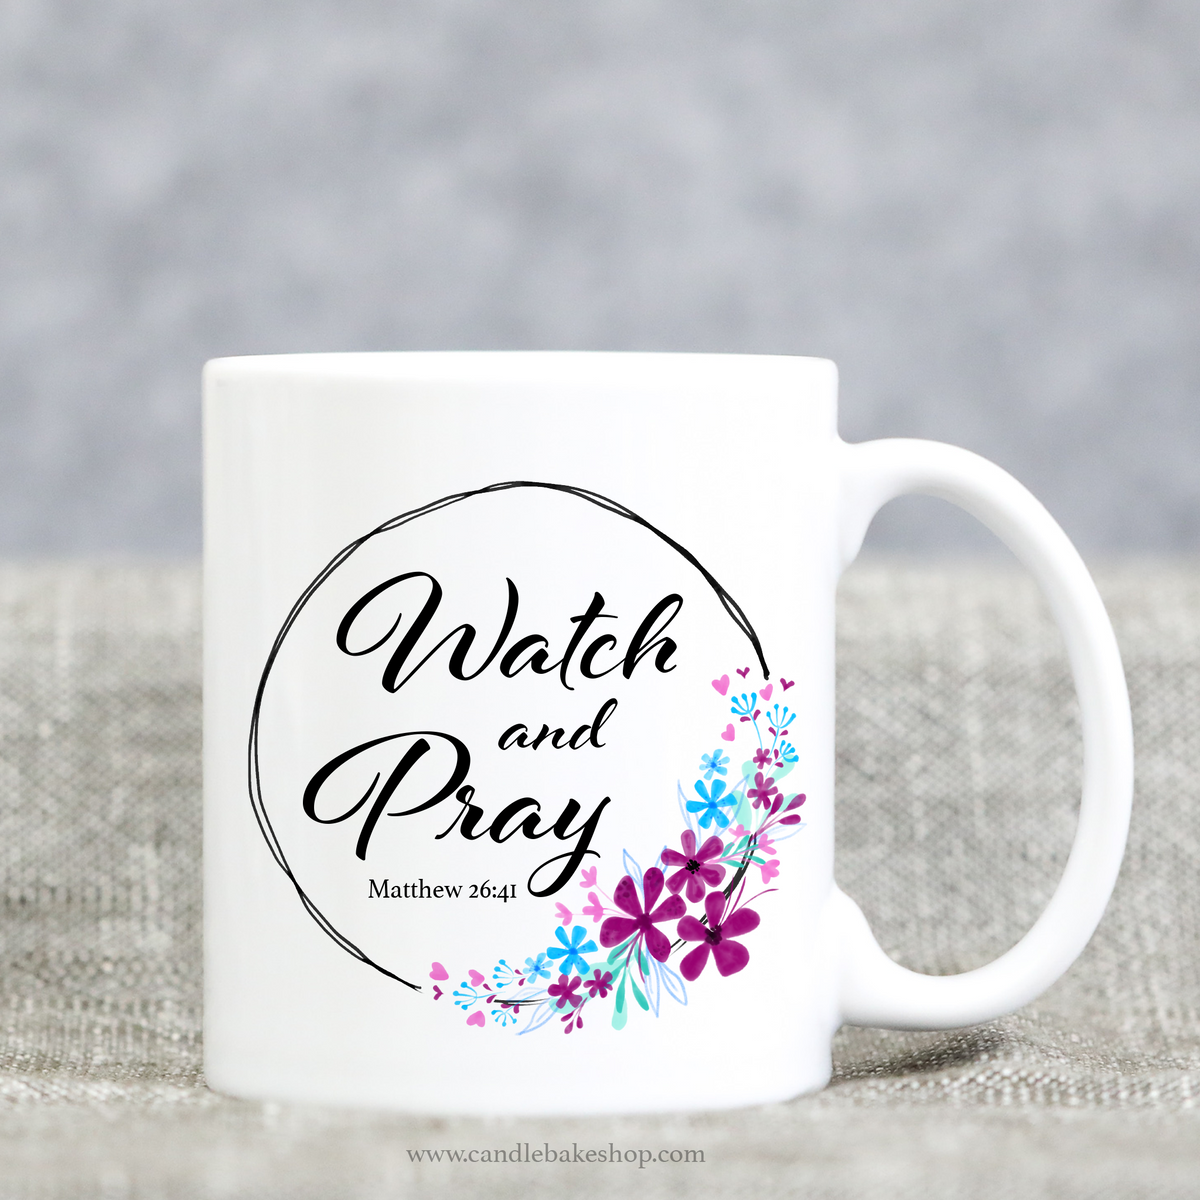 In Every Thing Give Thanks Mug, Scripture Gifts